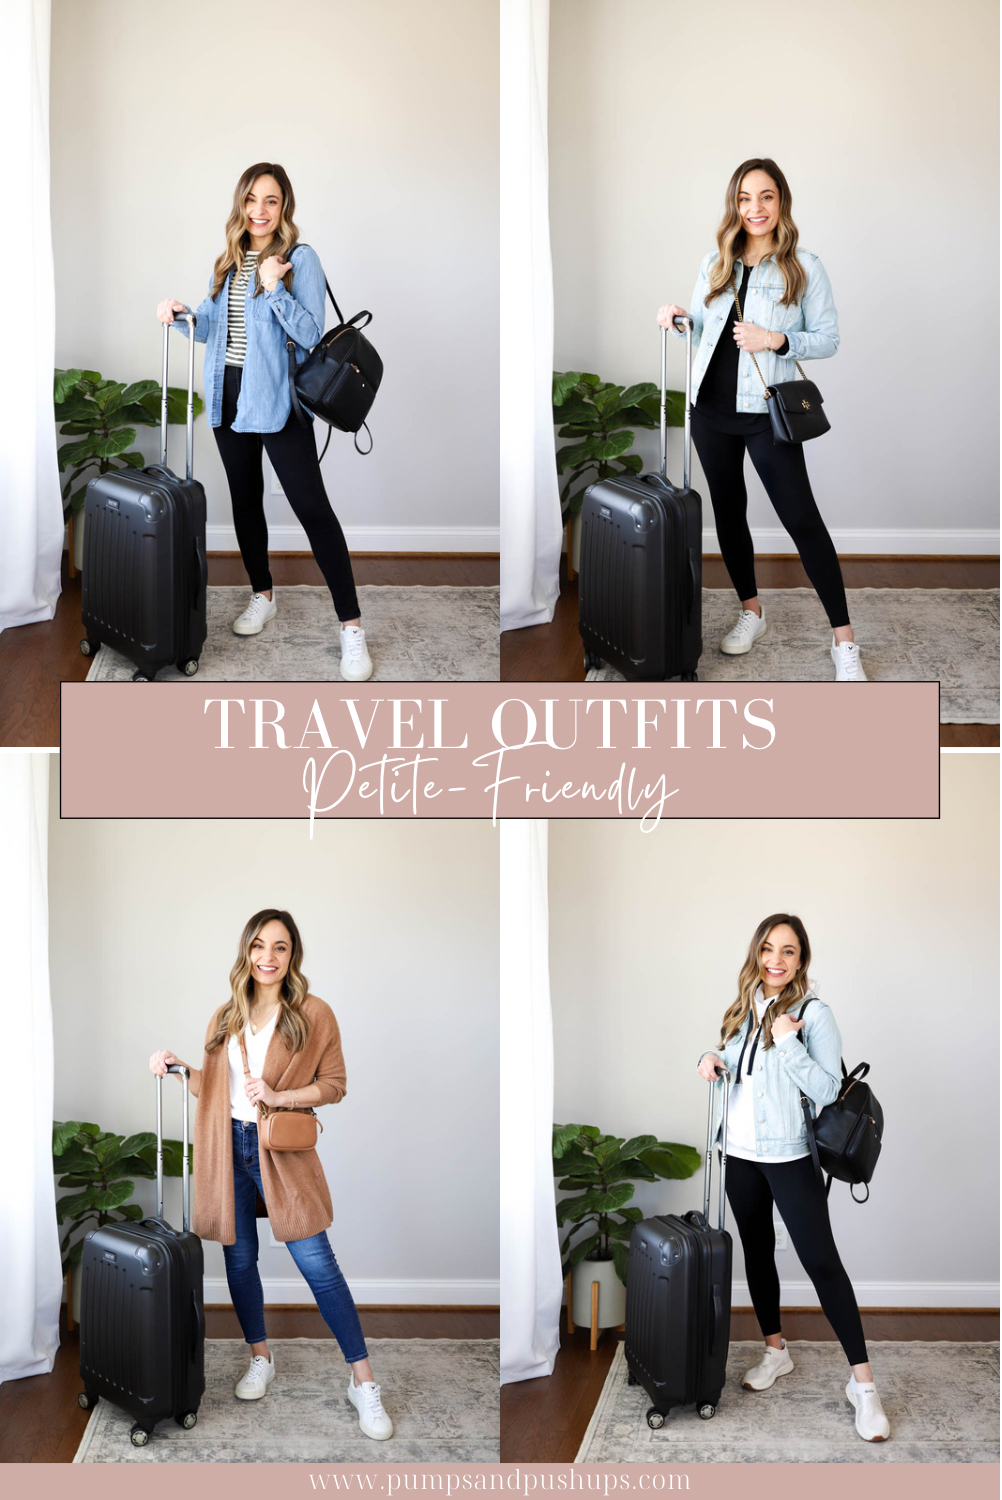 Winter Travel Outfit Ideas - Pumps & Push Ups